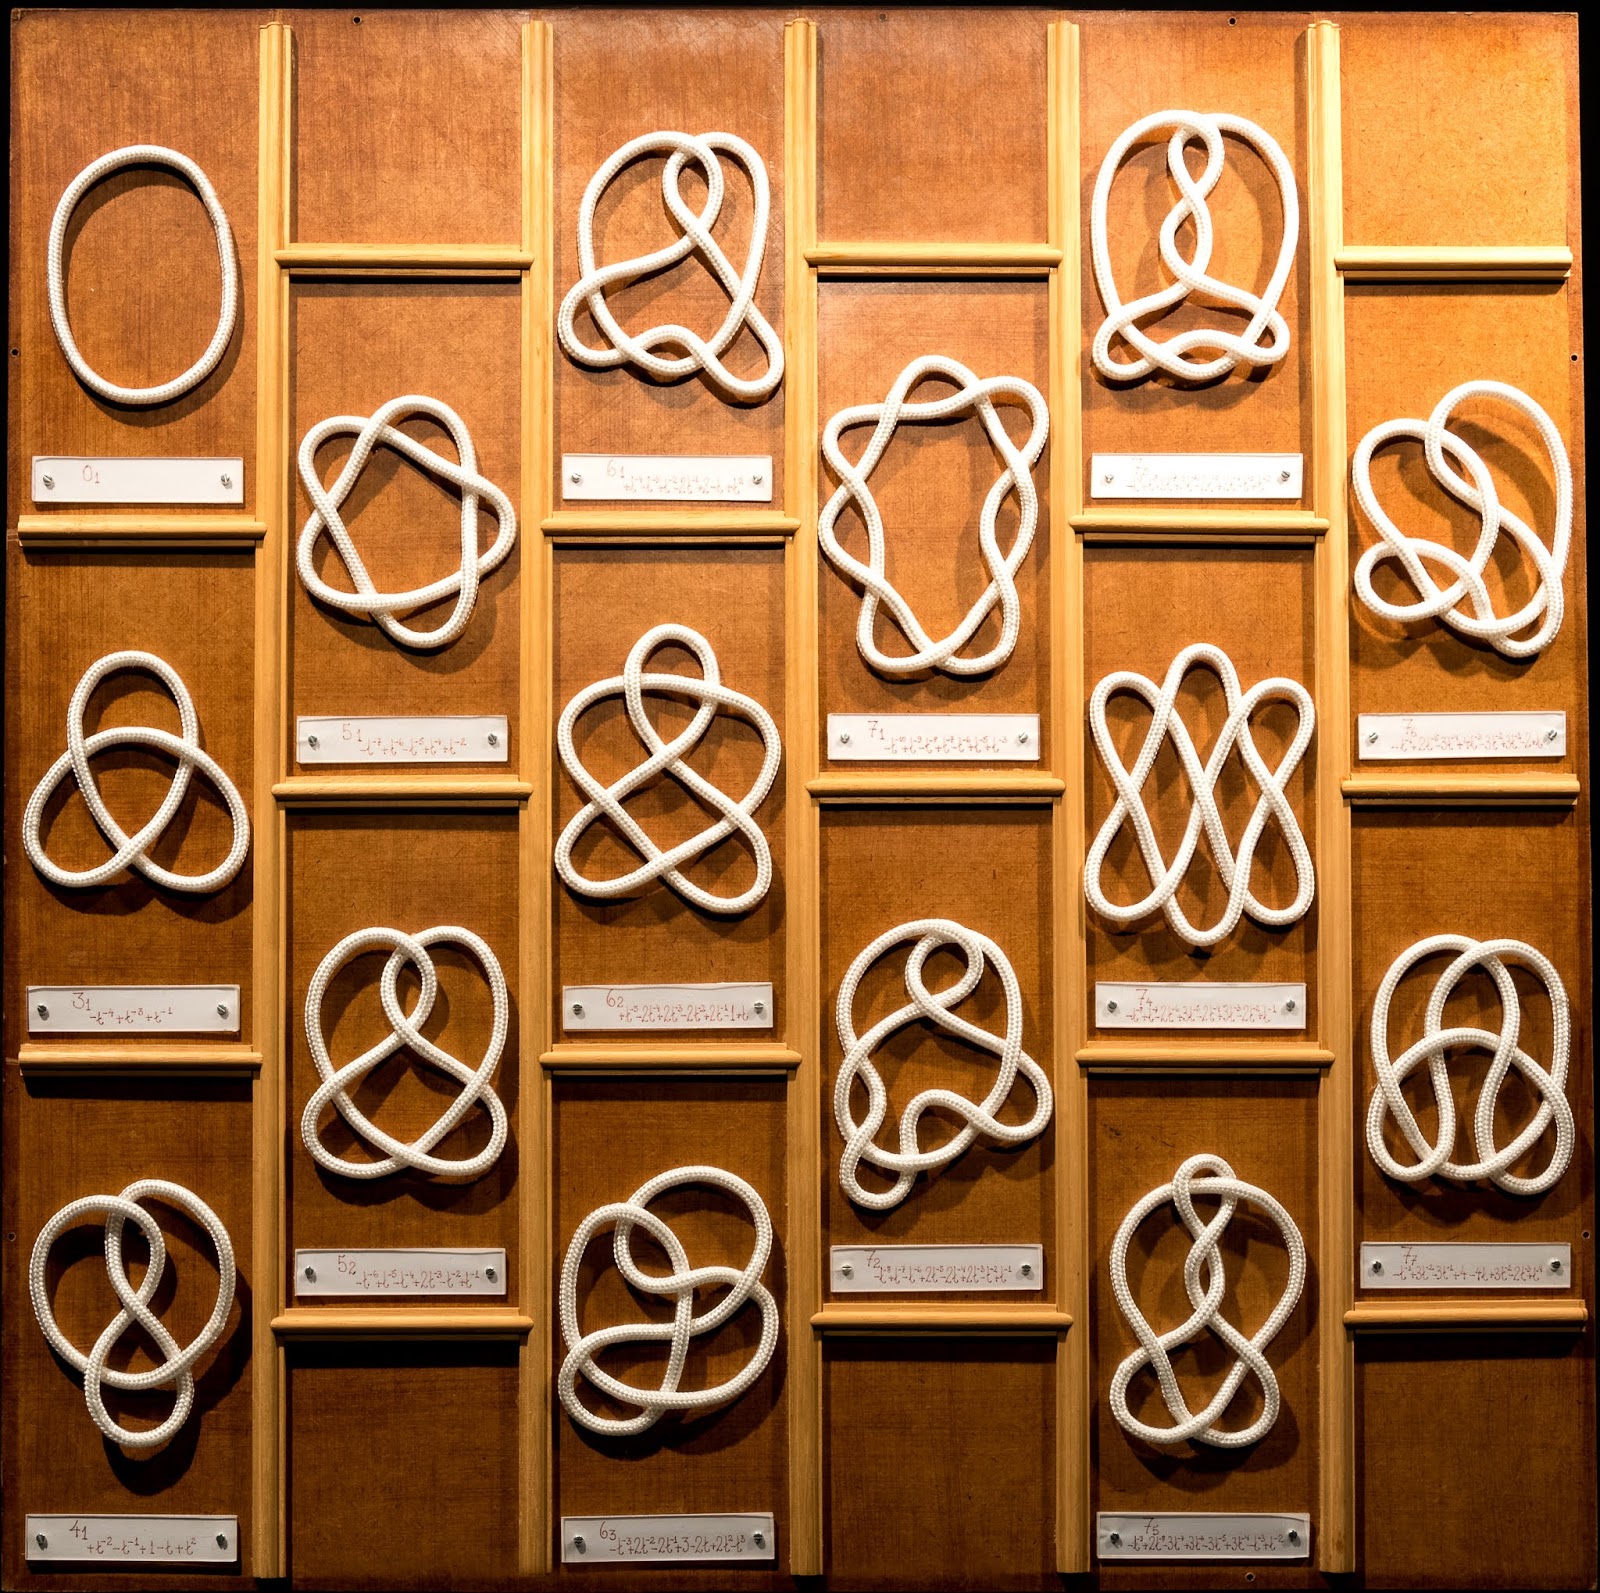 Knot Theory - Bhasker online blogs